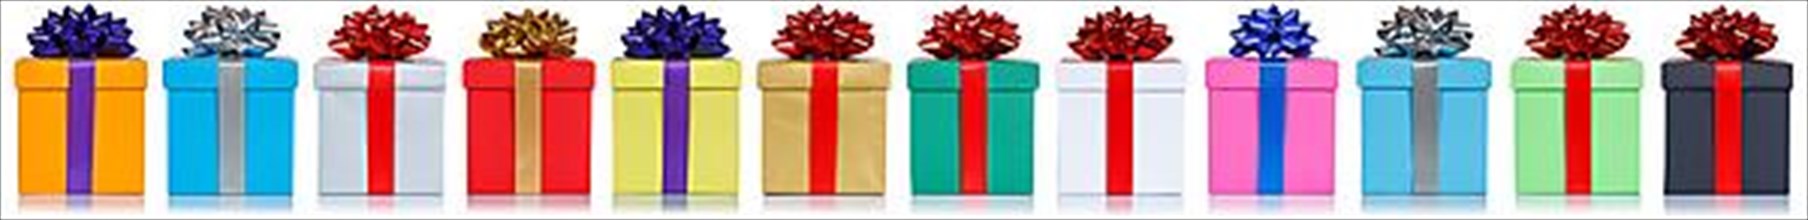 Gifts Birthday Christmas in a Row Boxes Free Plate Isolated